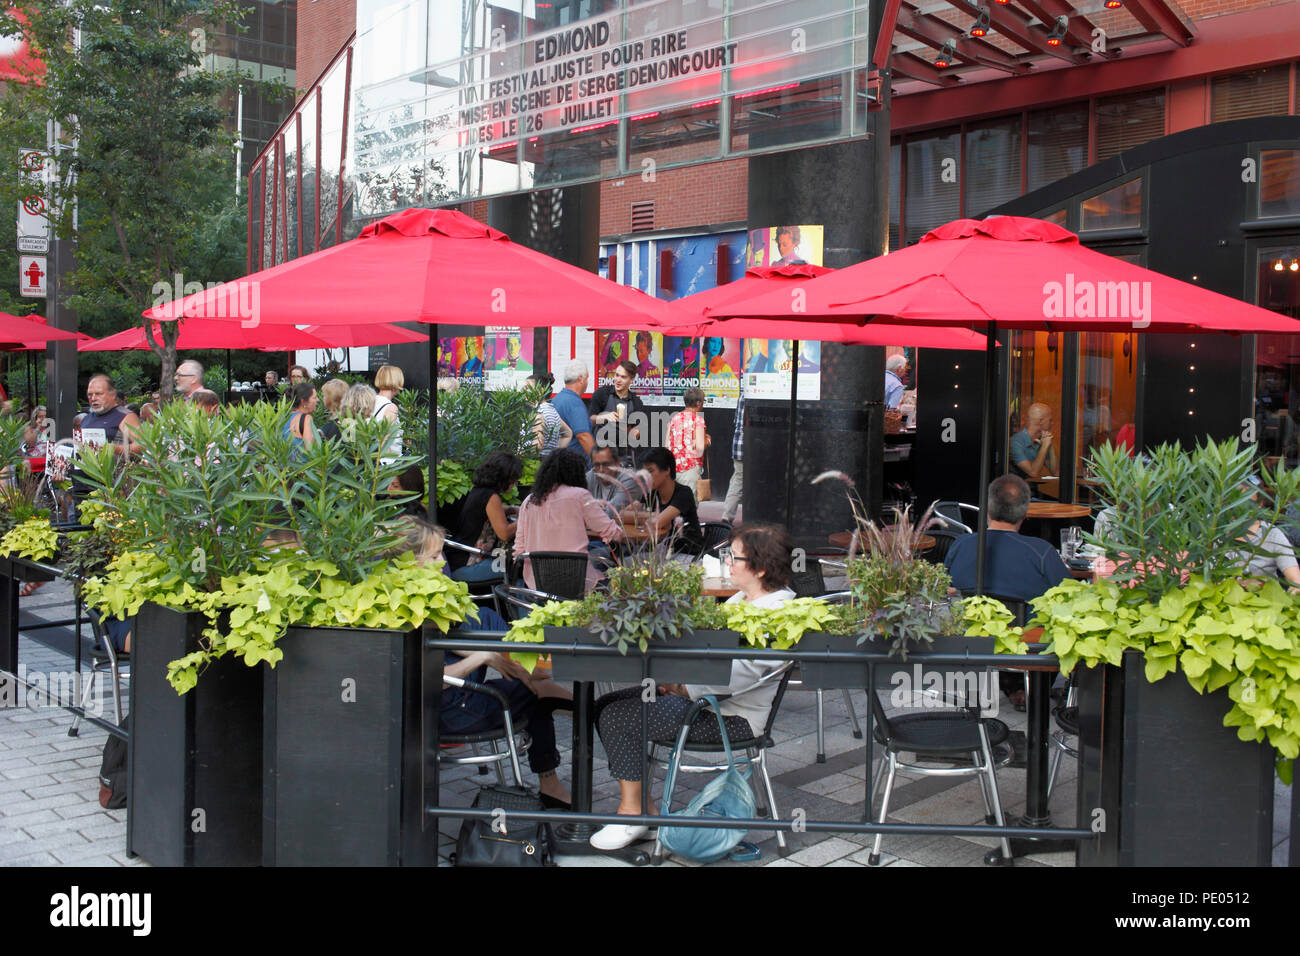 Canada, Montreal, Ste-Catherine Street, cafe, persone Foto Stock